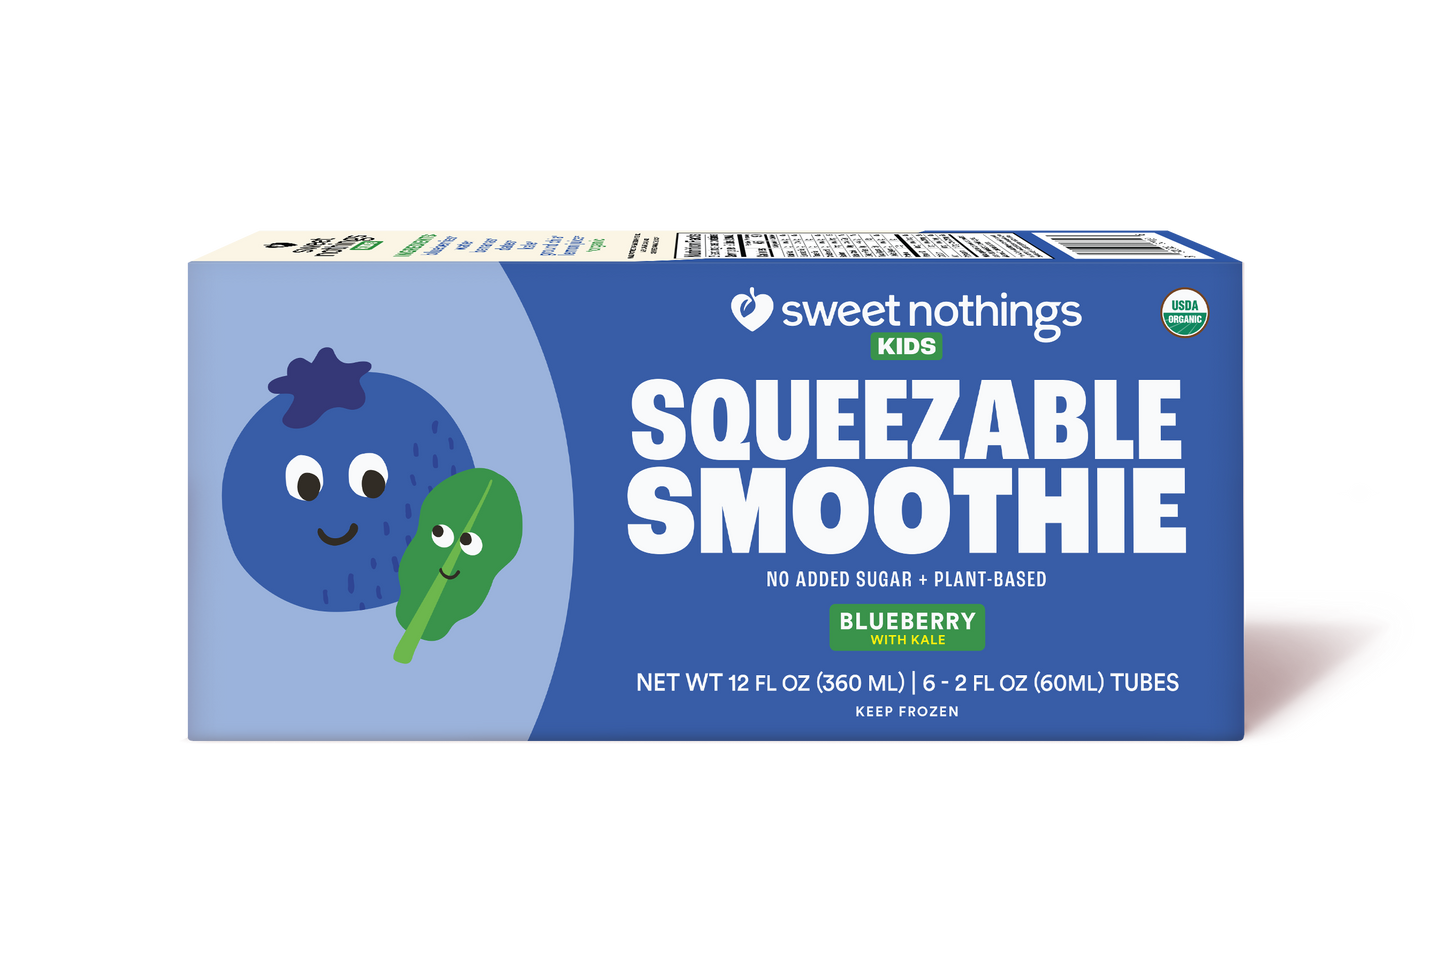 Sweet Nothings Blueberry Kale Squeezable Smoothies